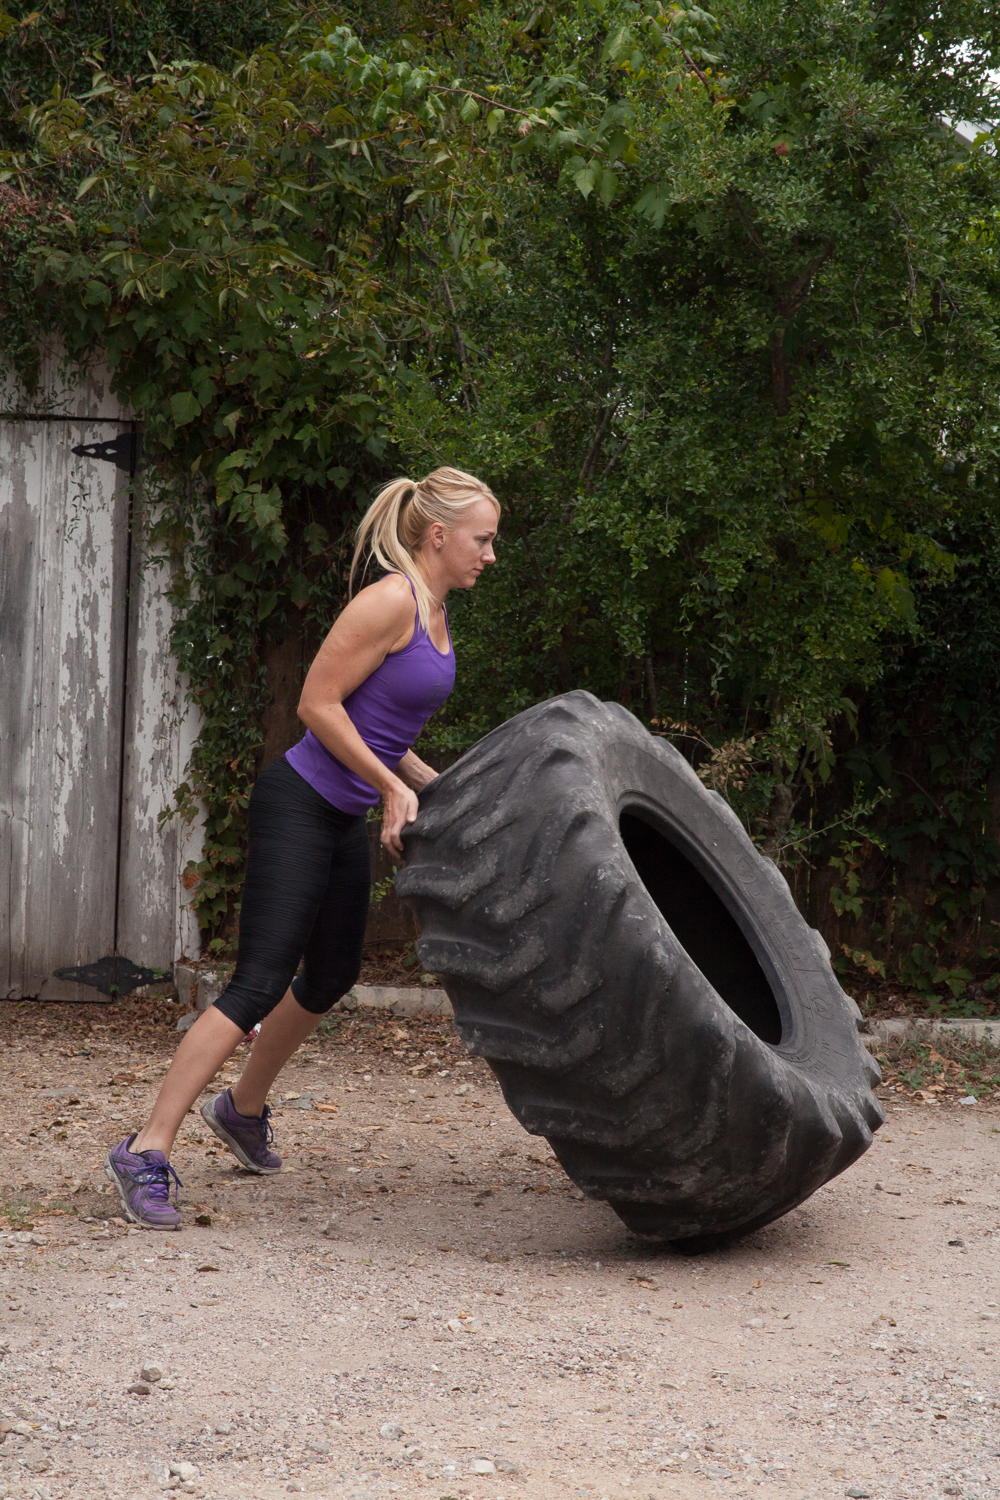 Tire flipping. Photo by Becca Ewing